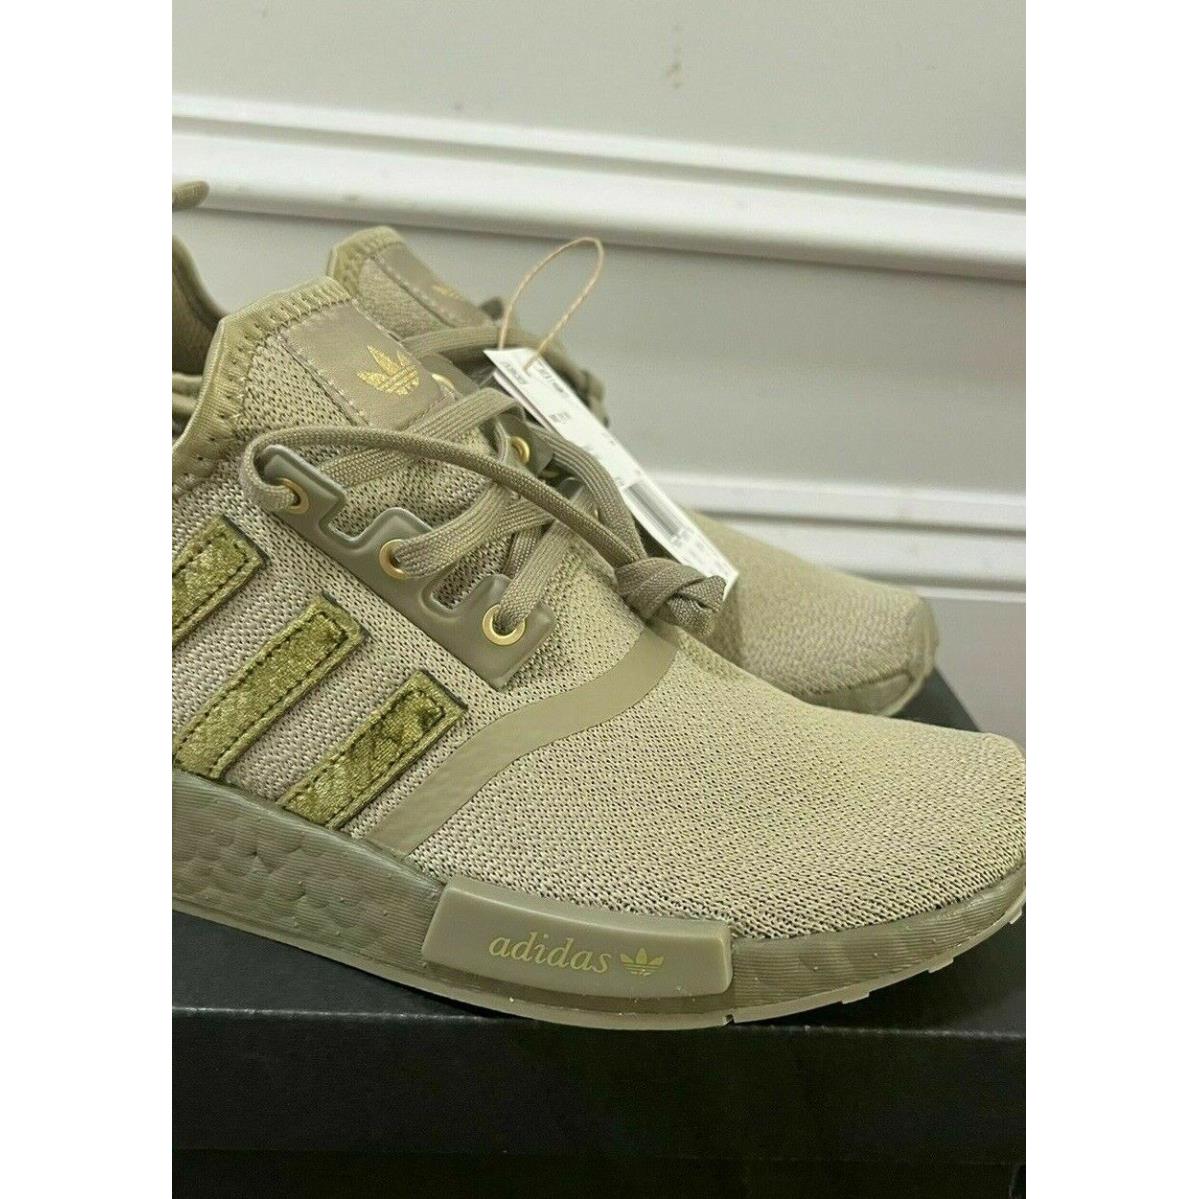 Bueno Químico Accidental Adidas Nmd R1 Velvet Olive Green Gold Boost Women`s Sizes GY1321 Shoes |  692740537887 - Adidas shoes NMD - Green | SporTipTop